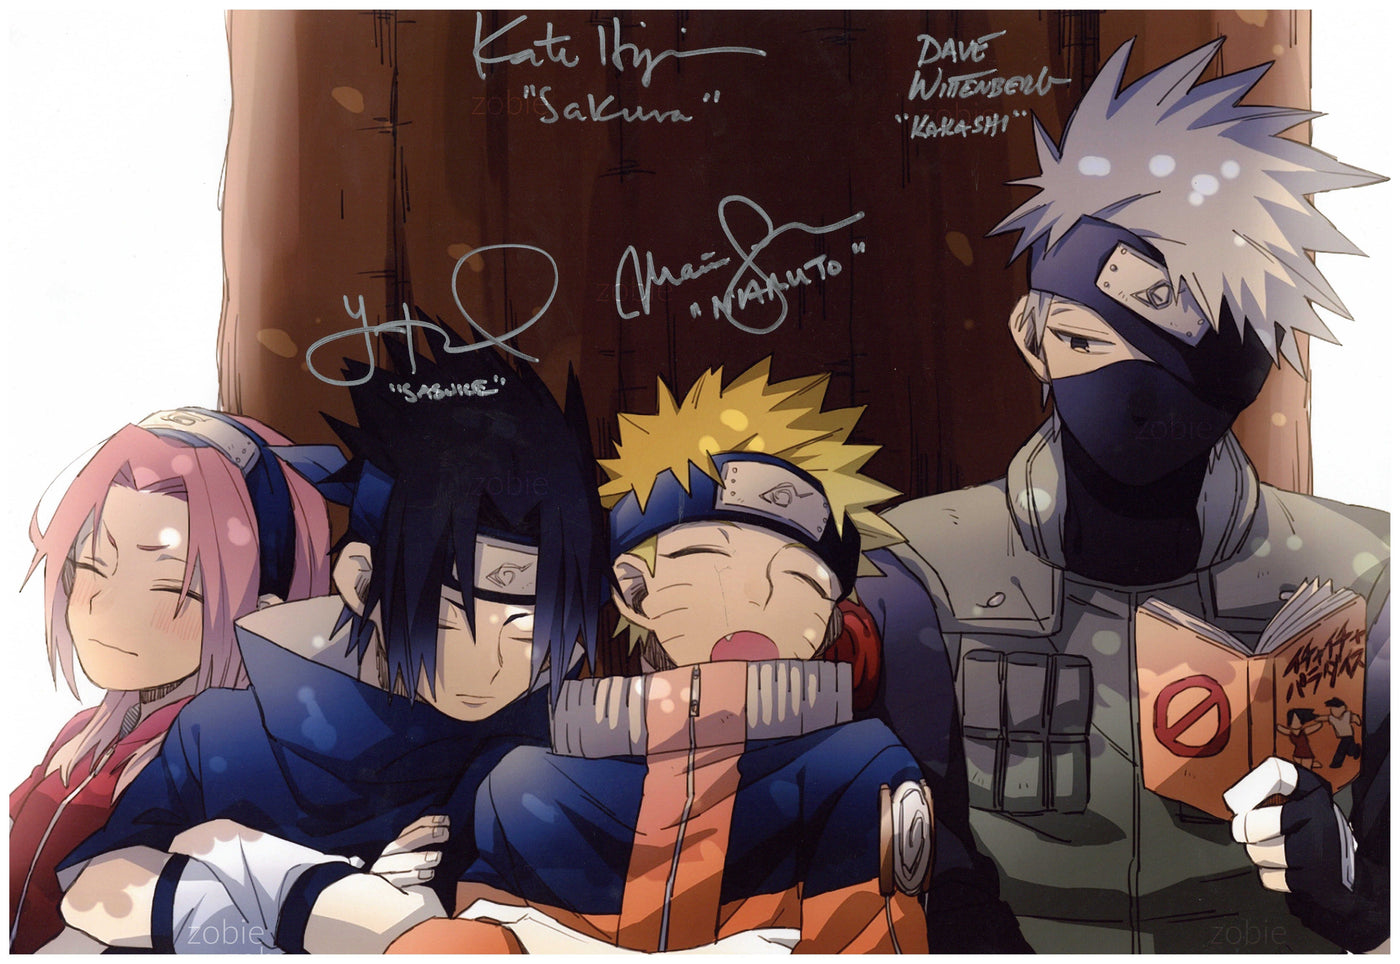 Naruto Cast Signed 12x18 Photo Kate Yuri Dave and Maile Authentic Autographed JSA COA